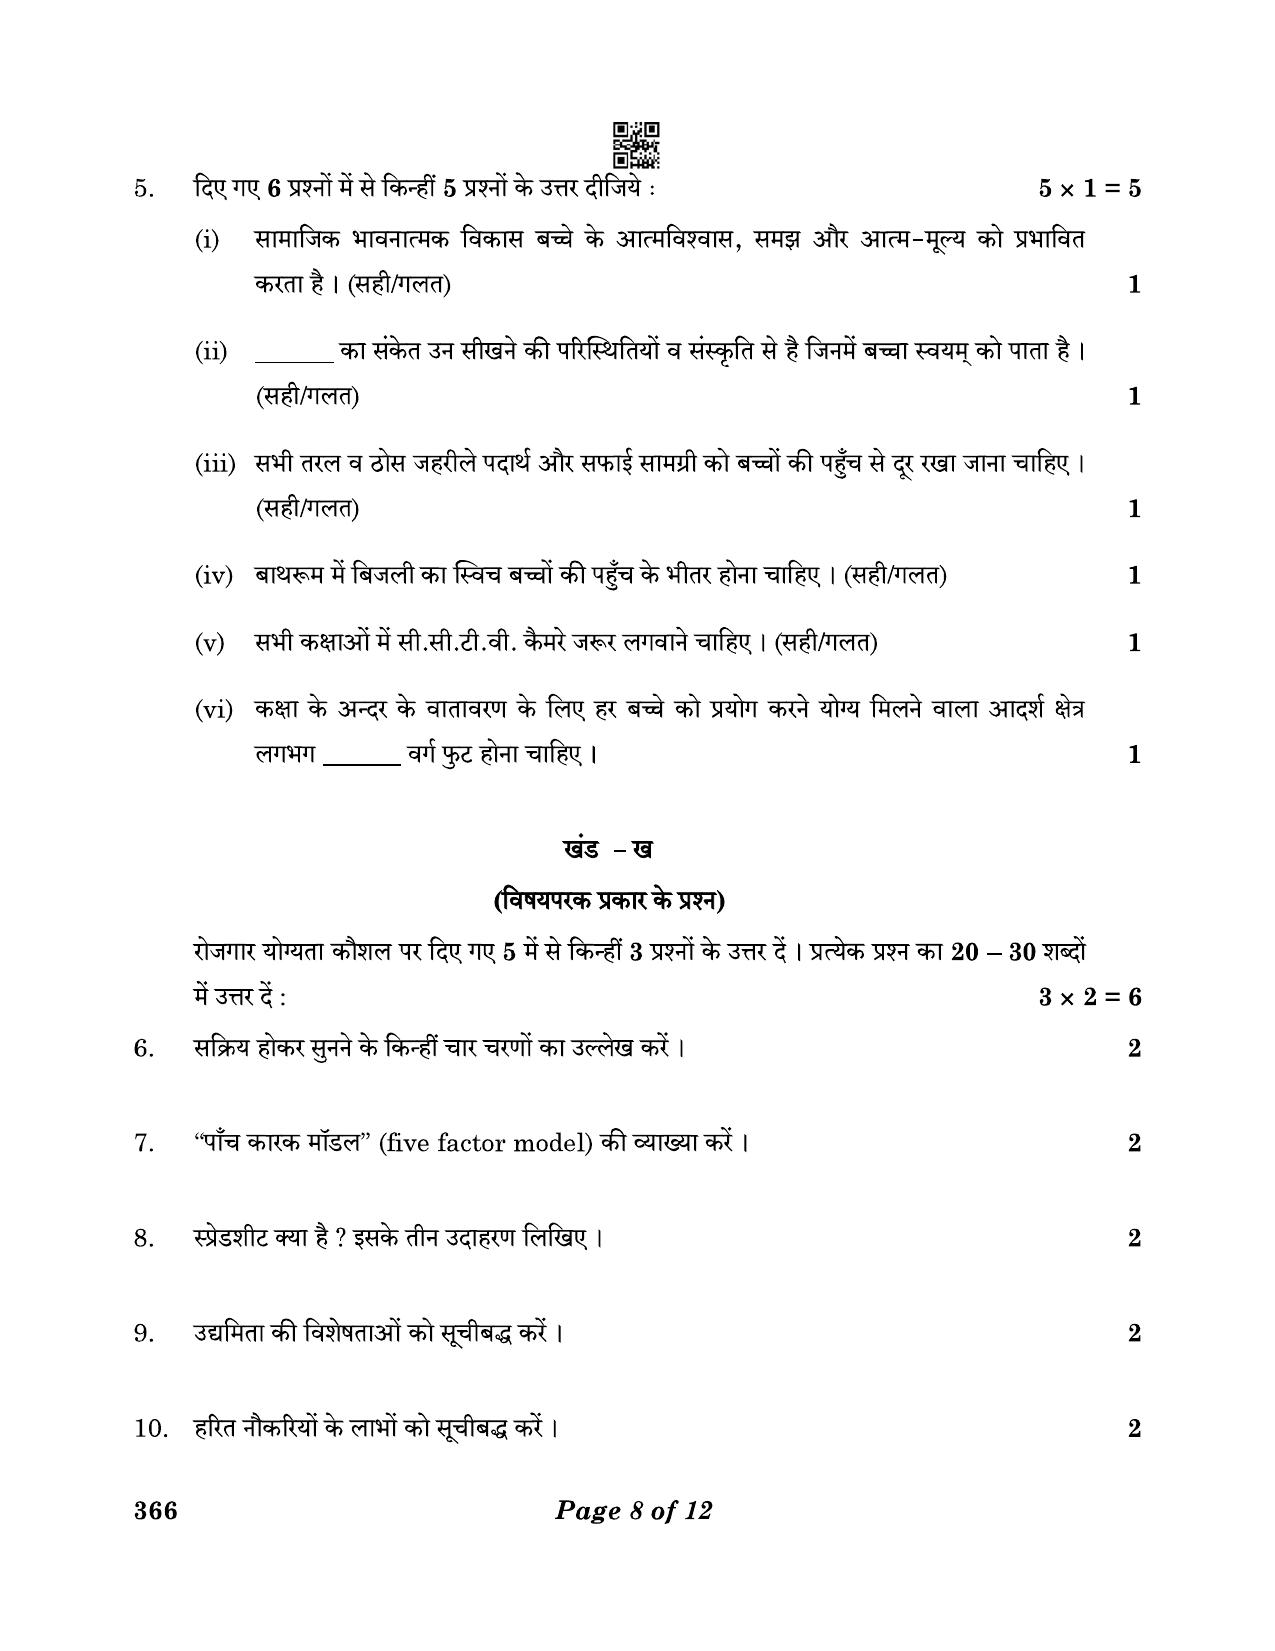 CBSE Class 12 366_Early Childhood Care & Education 2023 Question Paper - Page 8